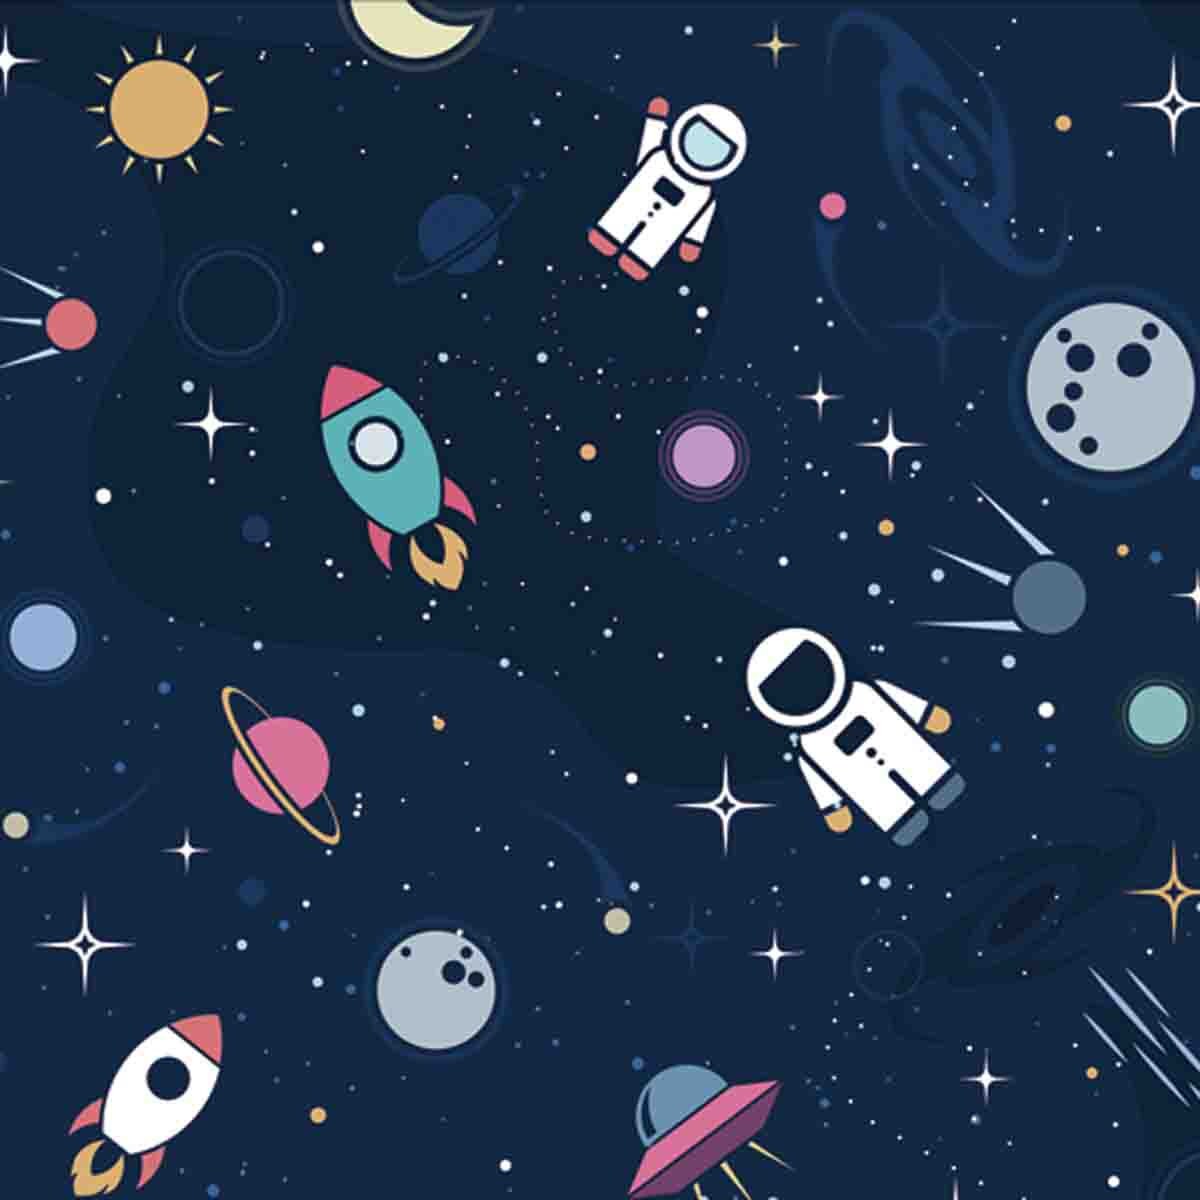 Astronaut, Spaceship, Rocket, Moon, Black Hole, Stars in Outer Space Wallpaper Little Boy Bedroom Mural